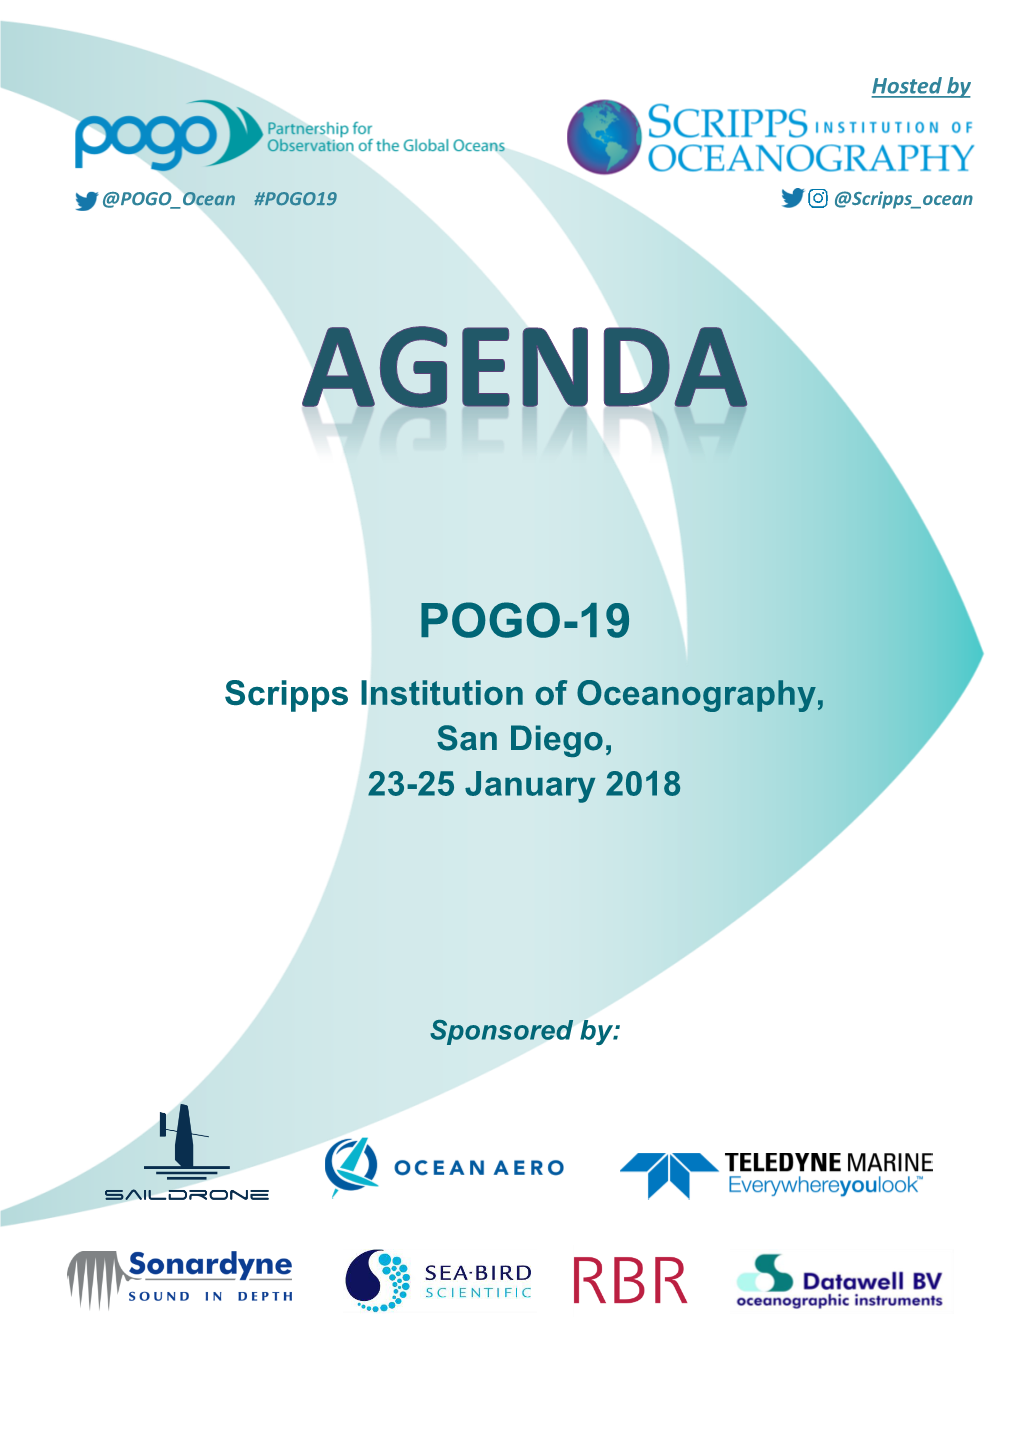 POGO-19 Scripps Institution of Oceanography, San Diego, 23-25 January 2018